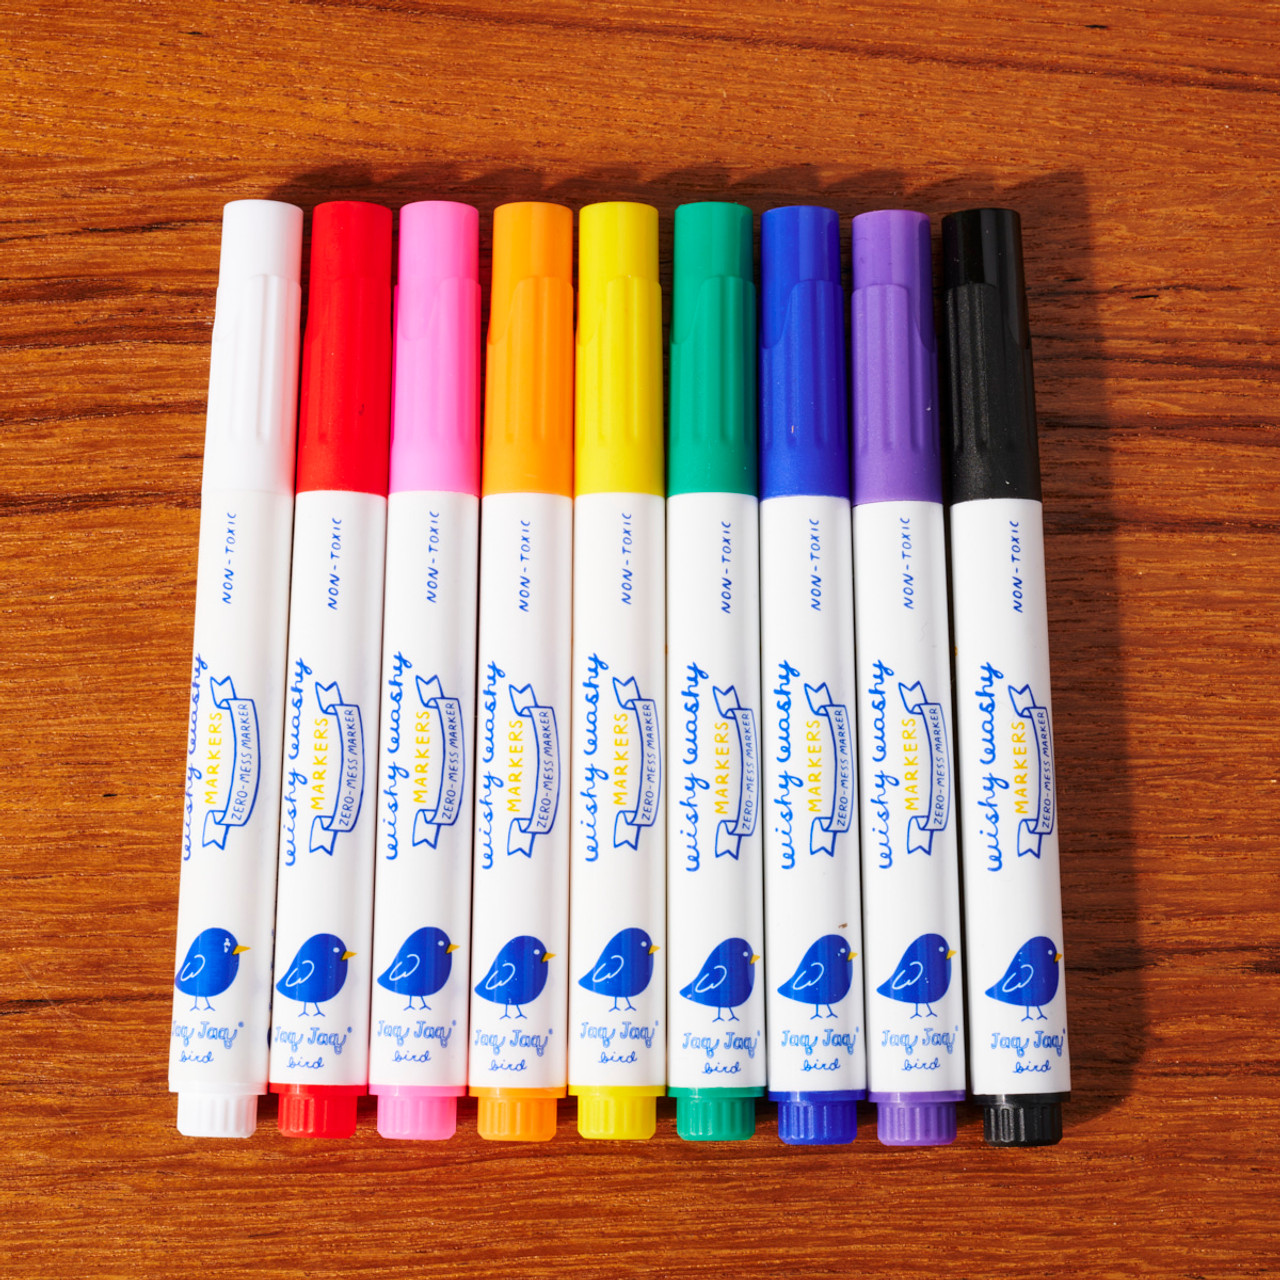 Wishy Washy Markers - Set of 9 Assorted Colors – SHOP Cooper Hewitt